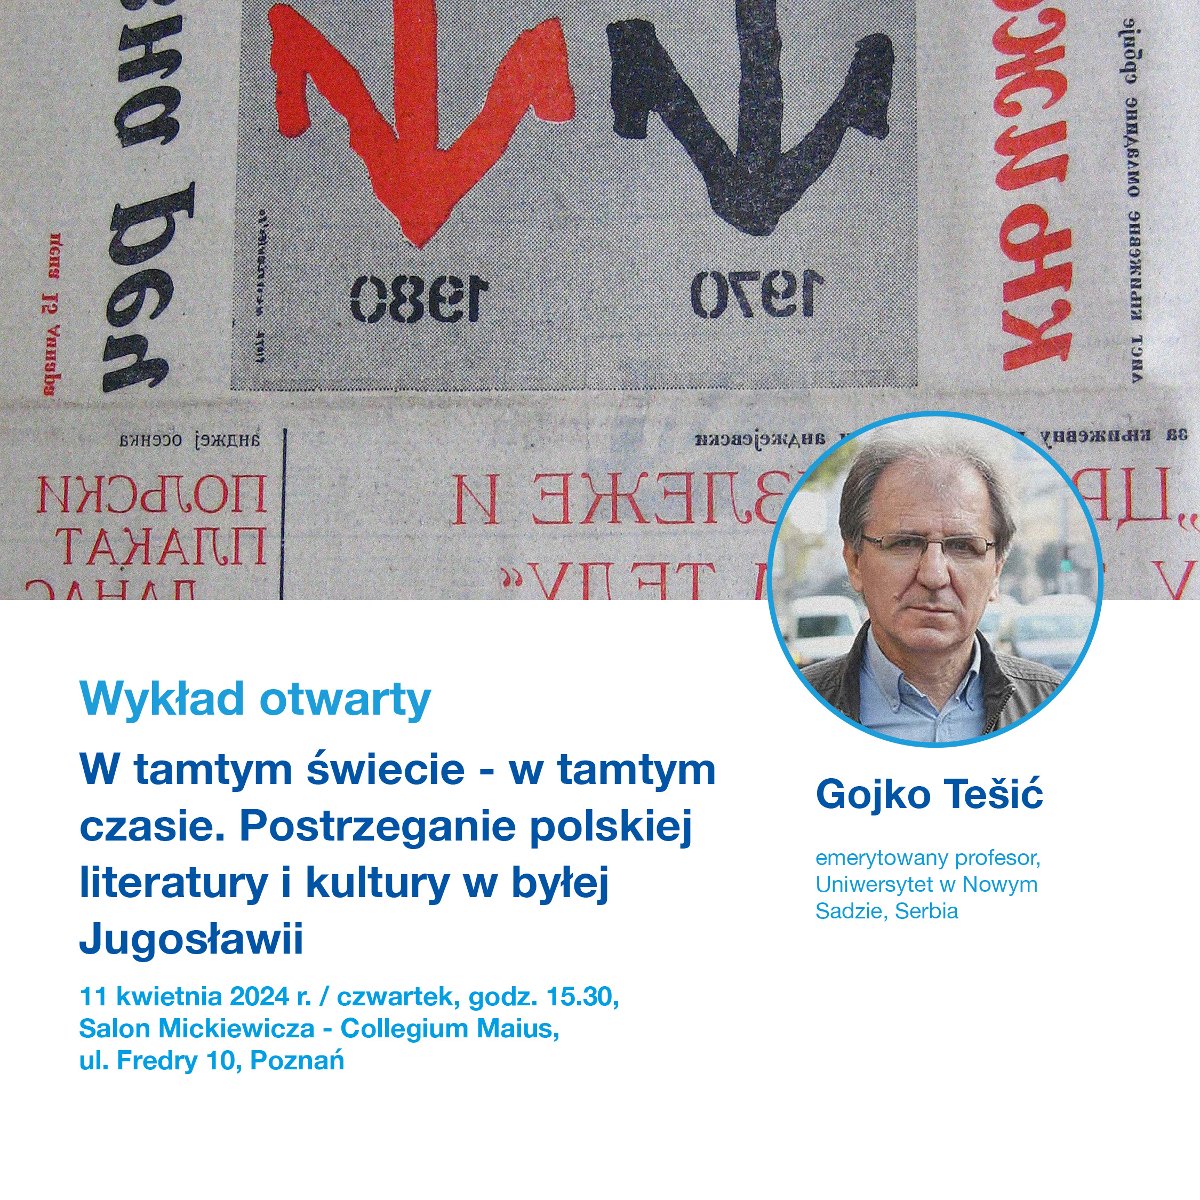 poster informing about the lecture - grafika artykułu